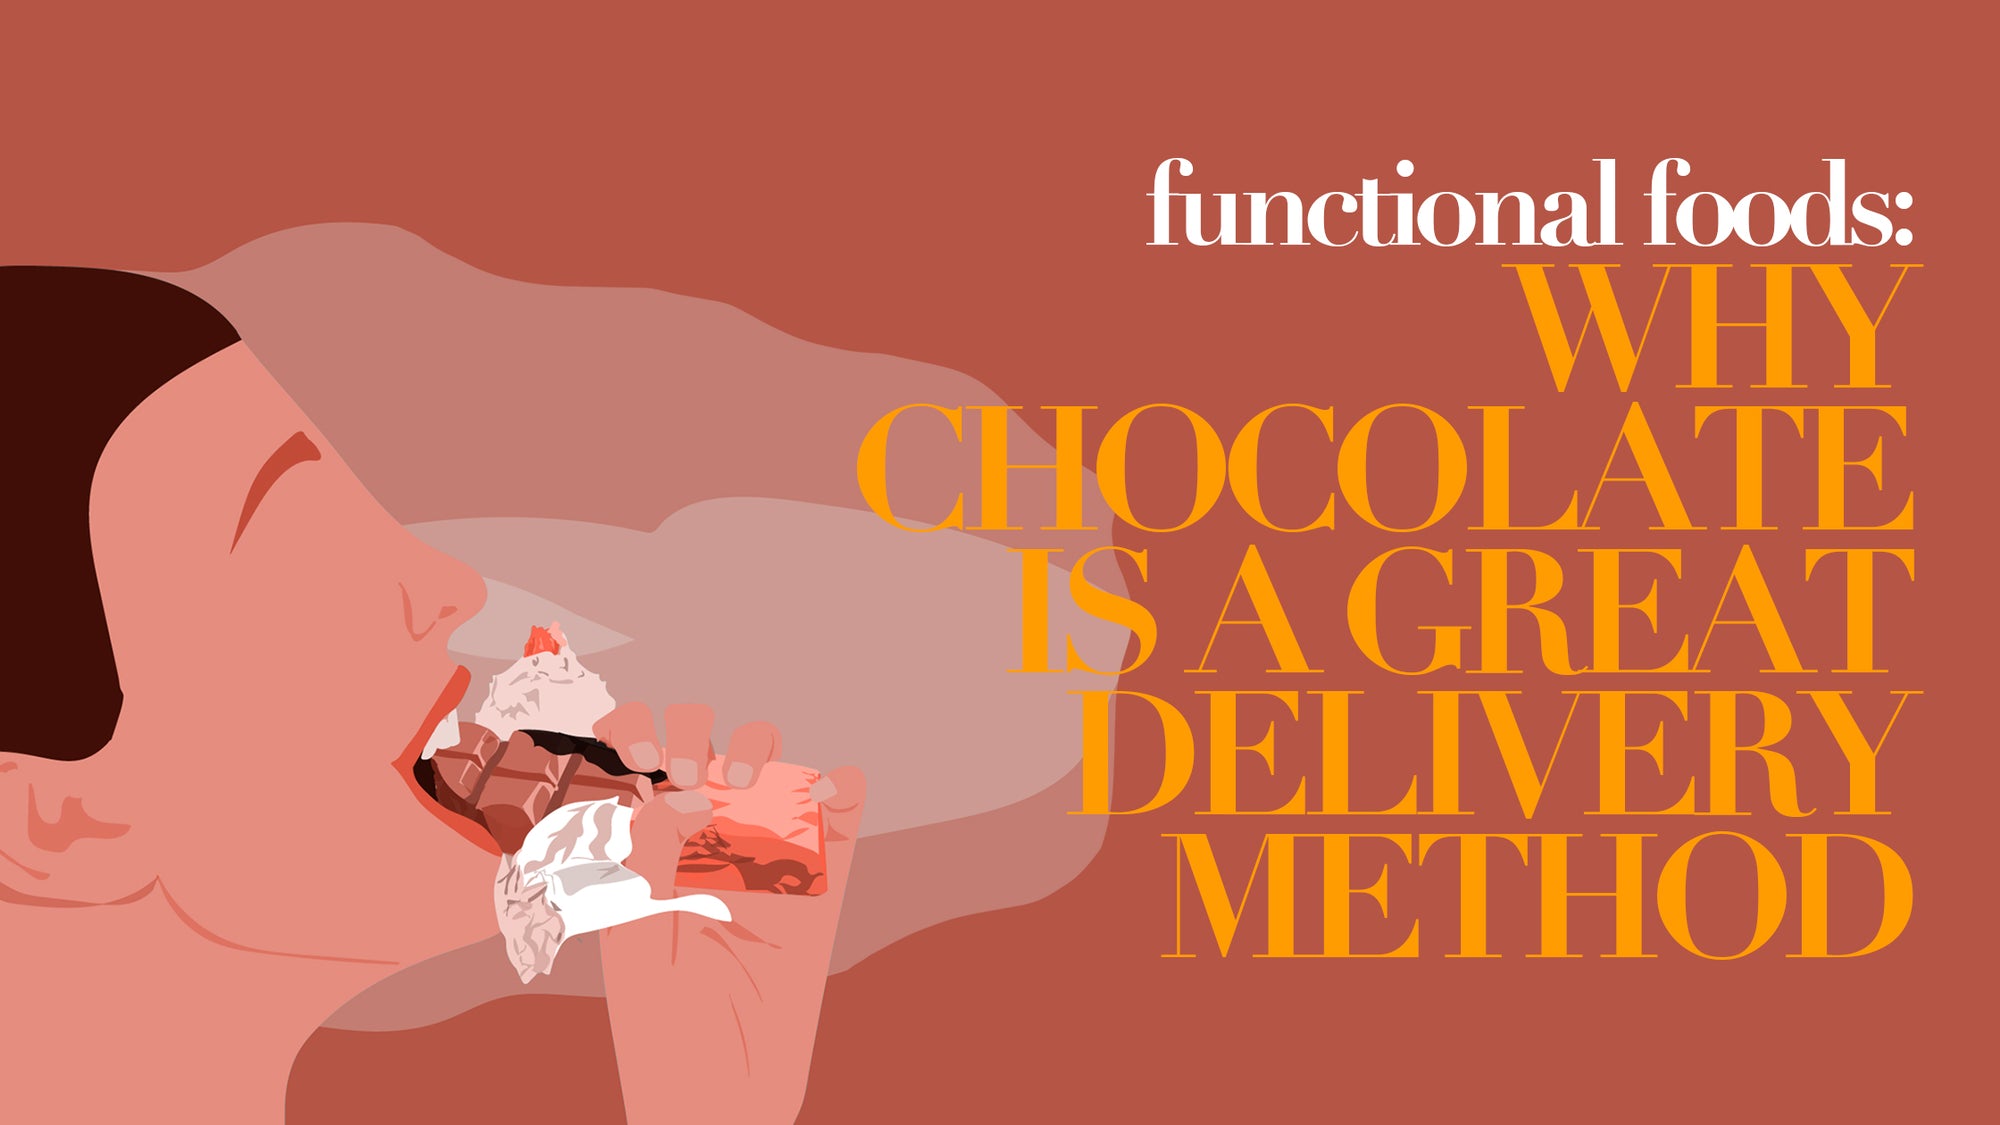 Functional Foods: Why Chocolate is a great delivery method